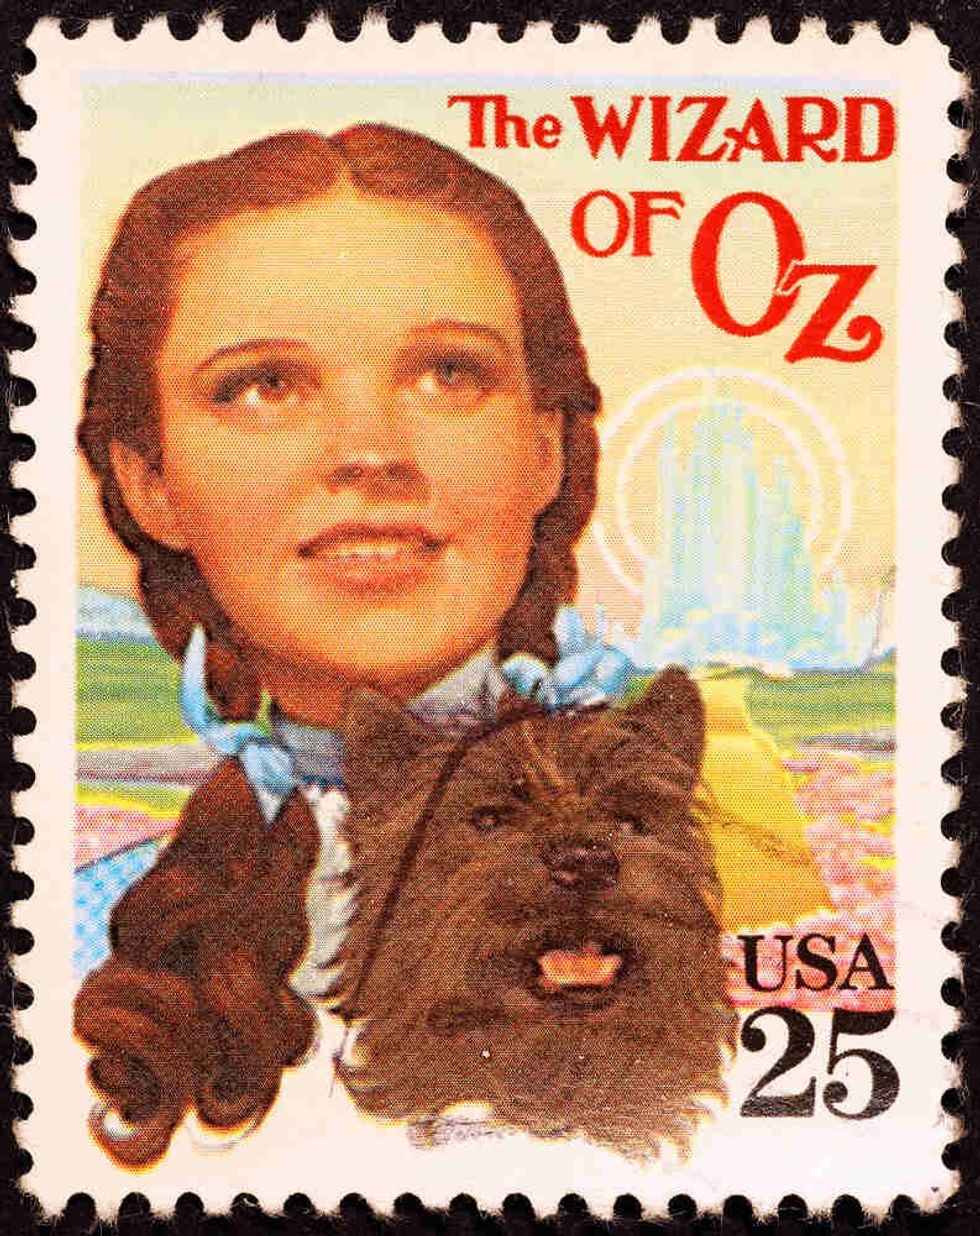 Movie Wizard of Oz on american postage stamp